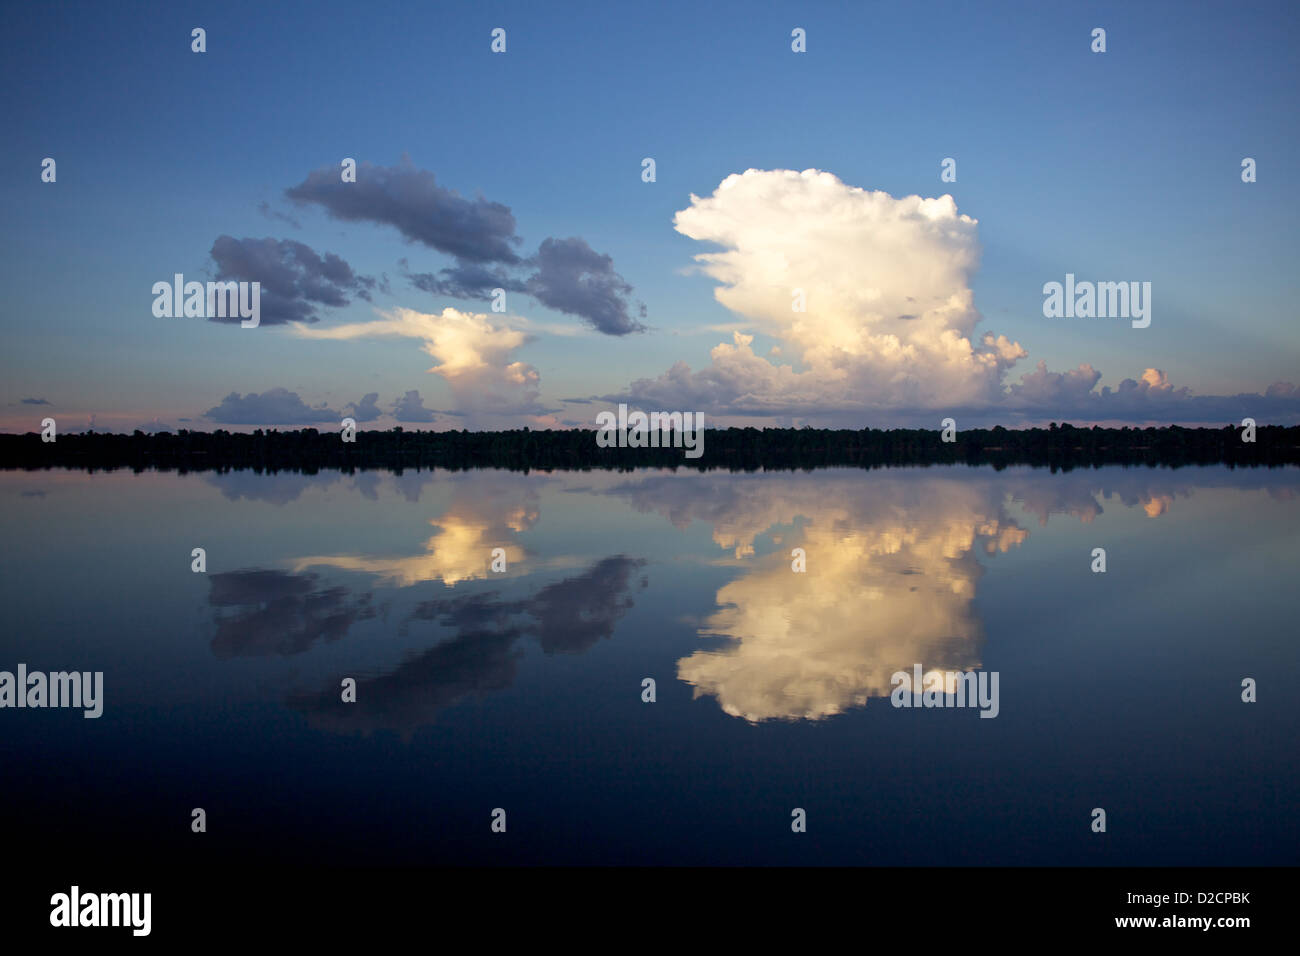 Storm clouds gather over the Amazon River Stock Photo